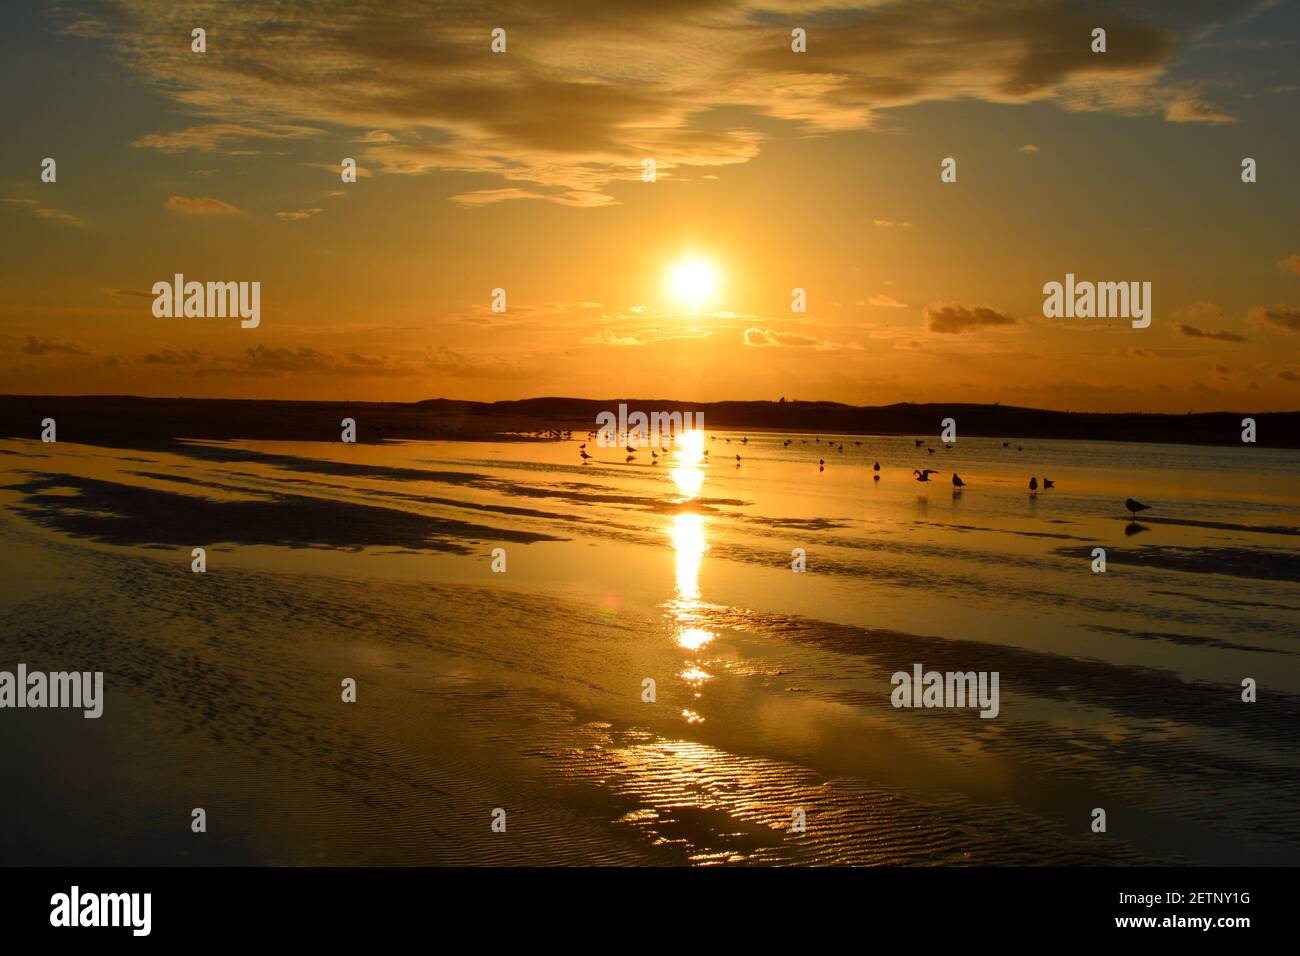 Oramge sunset  over the north  sea with birds  at low tide in the netherlands Stock Photo